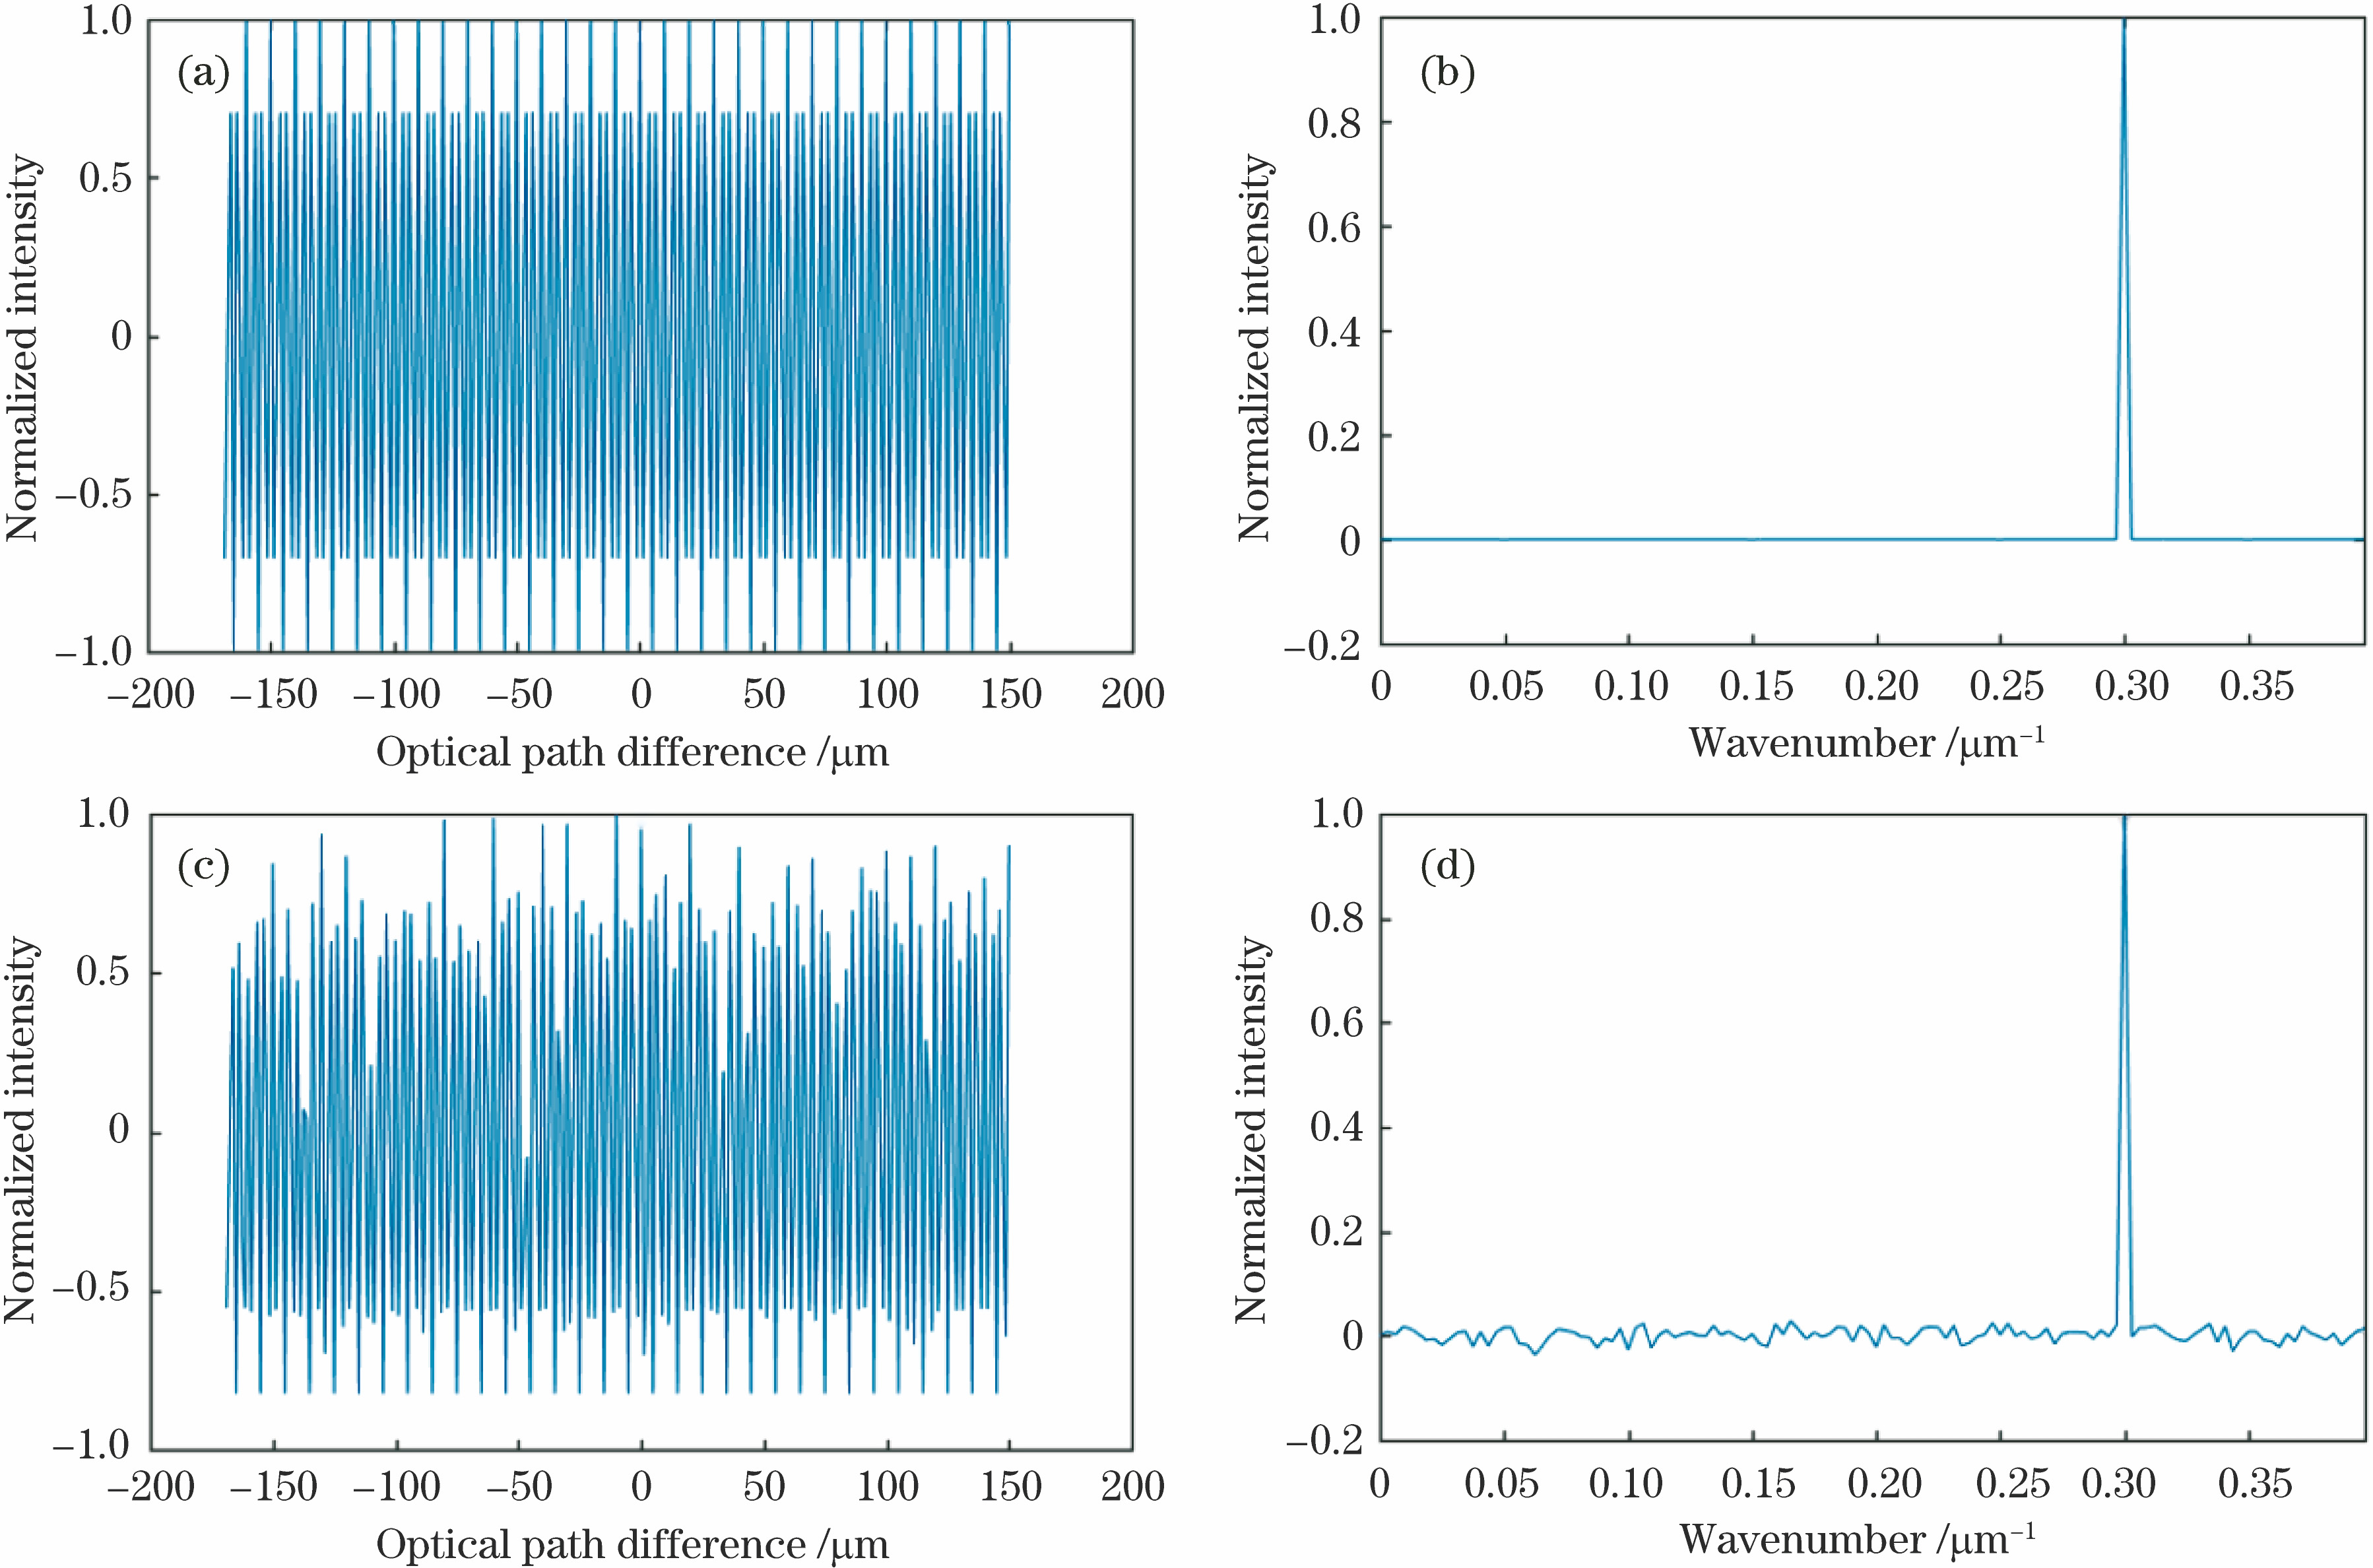 Interferogram sequences and recovered spectra corresponding to different focal length standard deviations. (a) Interferogram for σf=0 mm; (b) spectrum for σf=0 mm; (c) interferogram for σf=2 mm; (d) spectrum for σf=2 mm